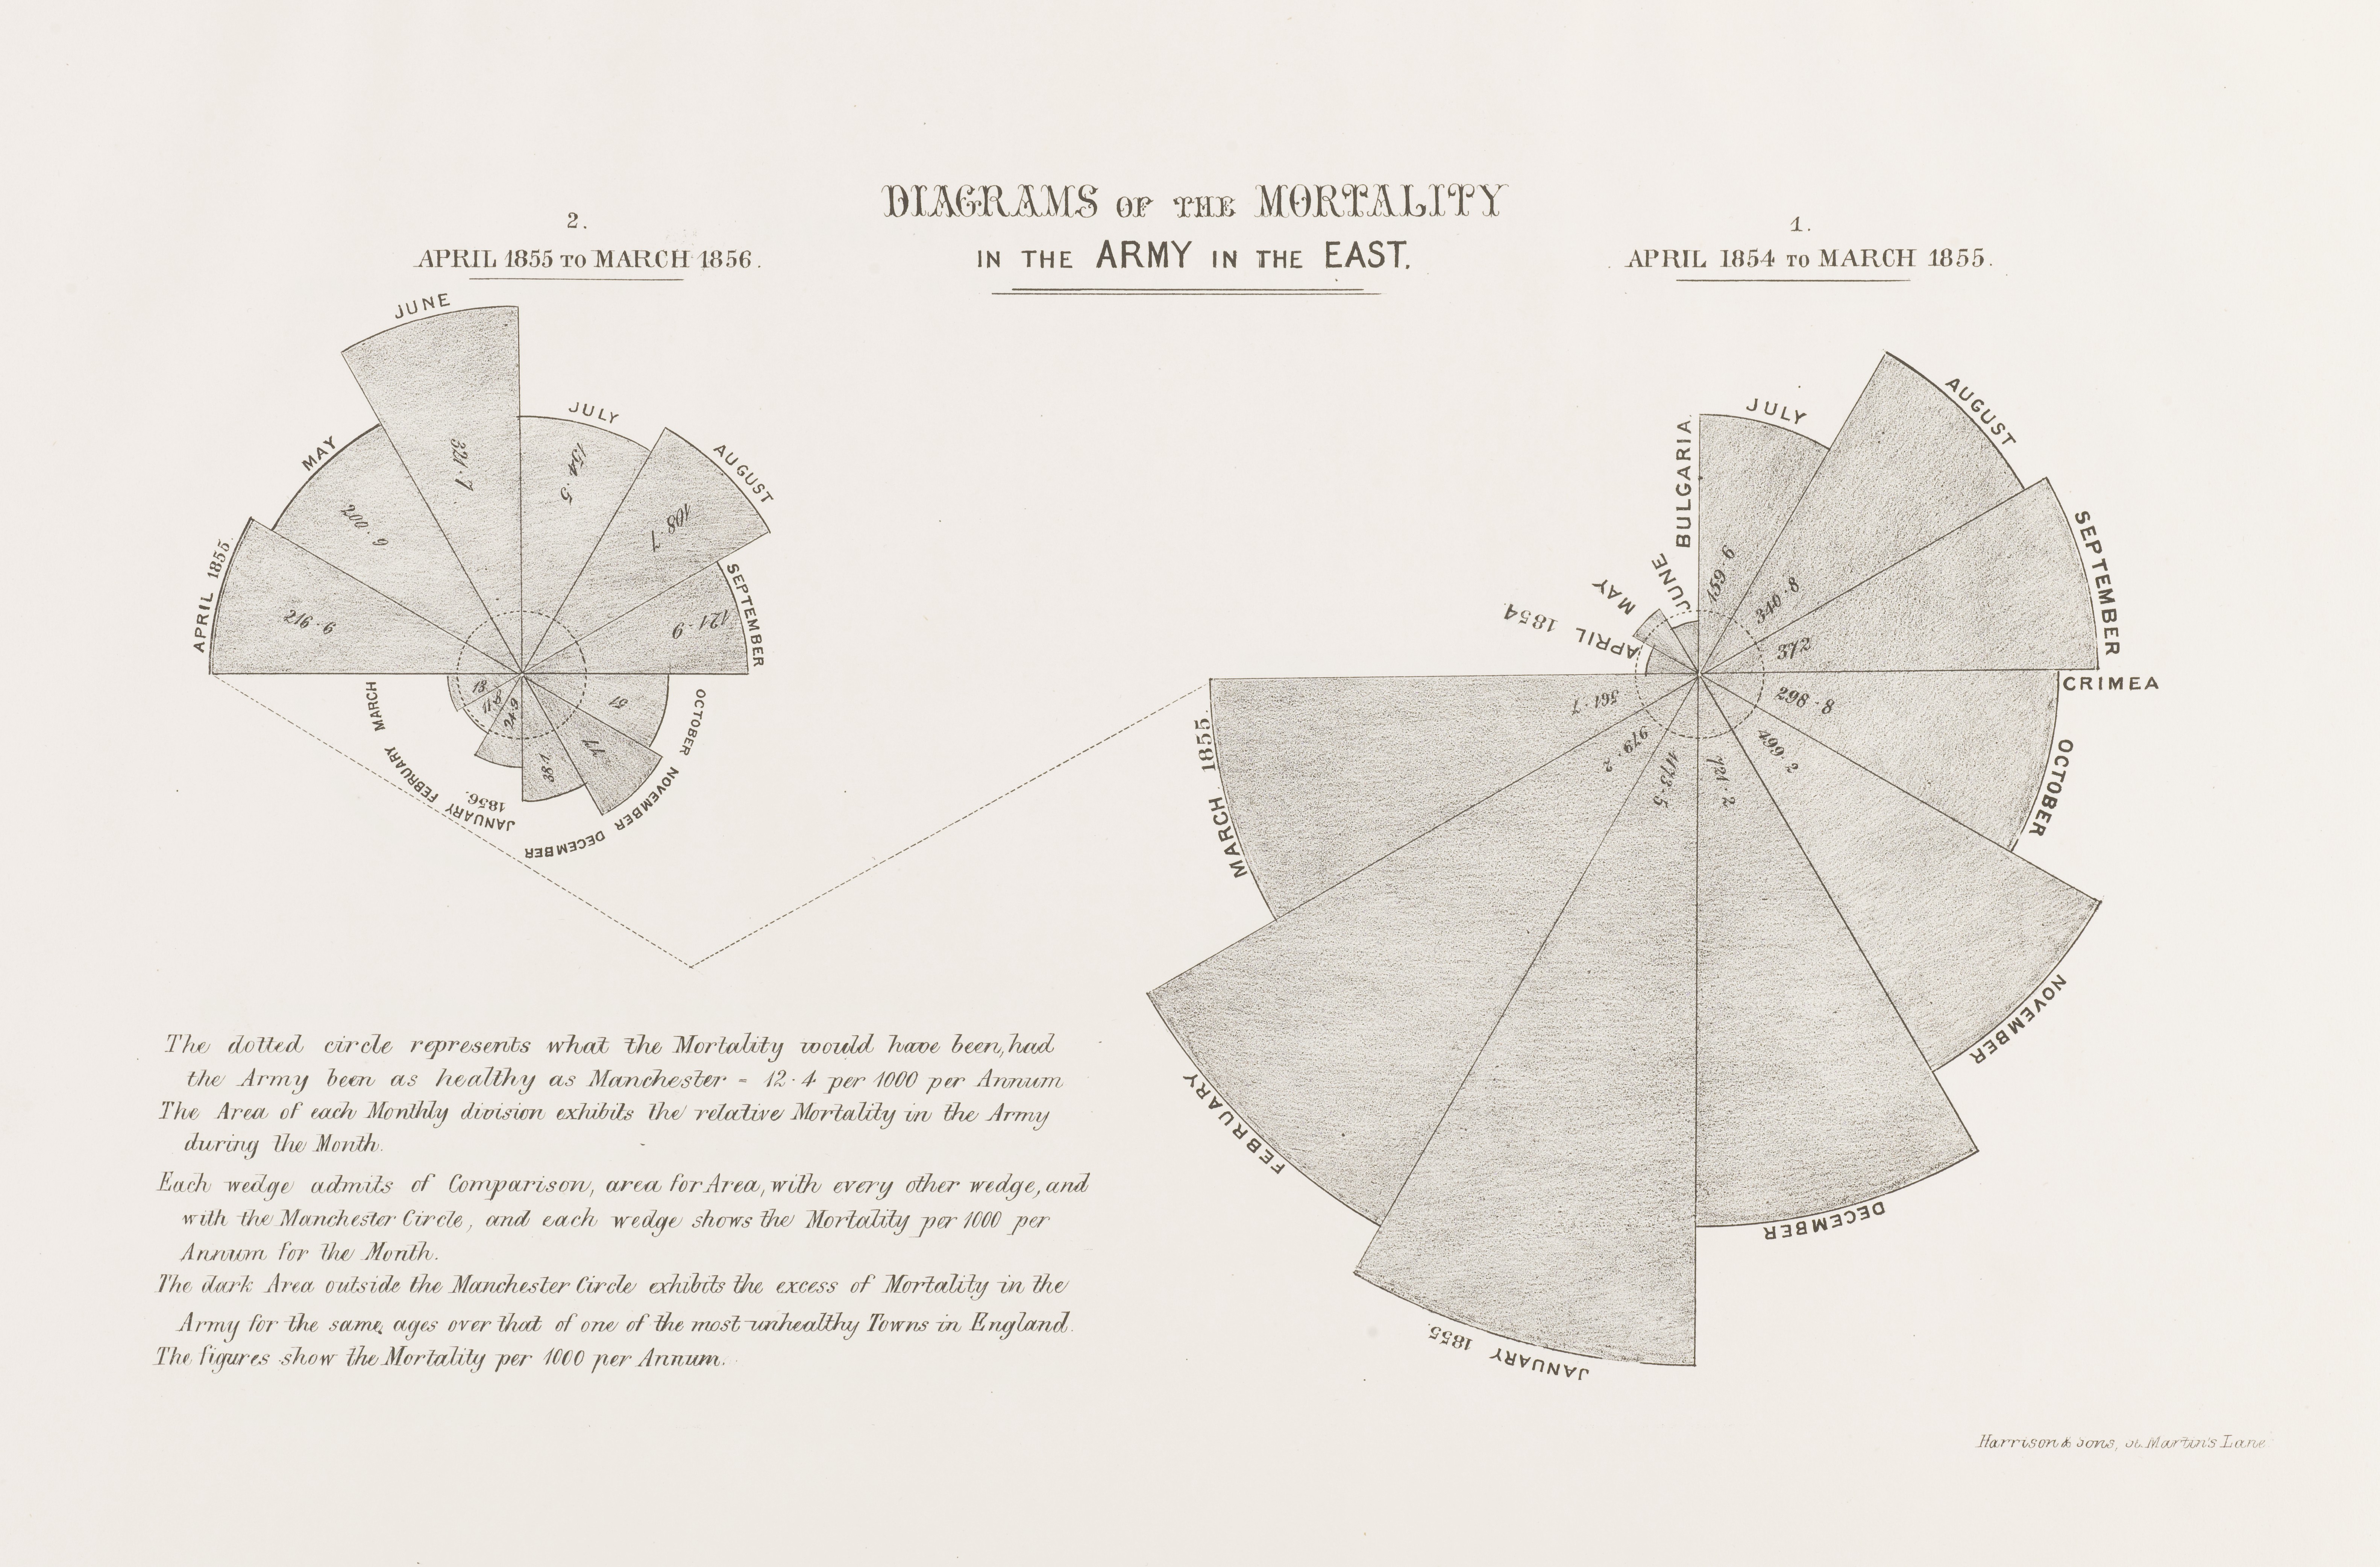 nightingale and rose diagram mortality